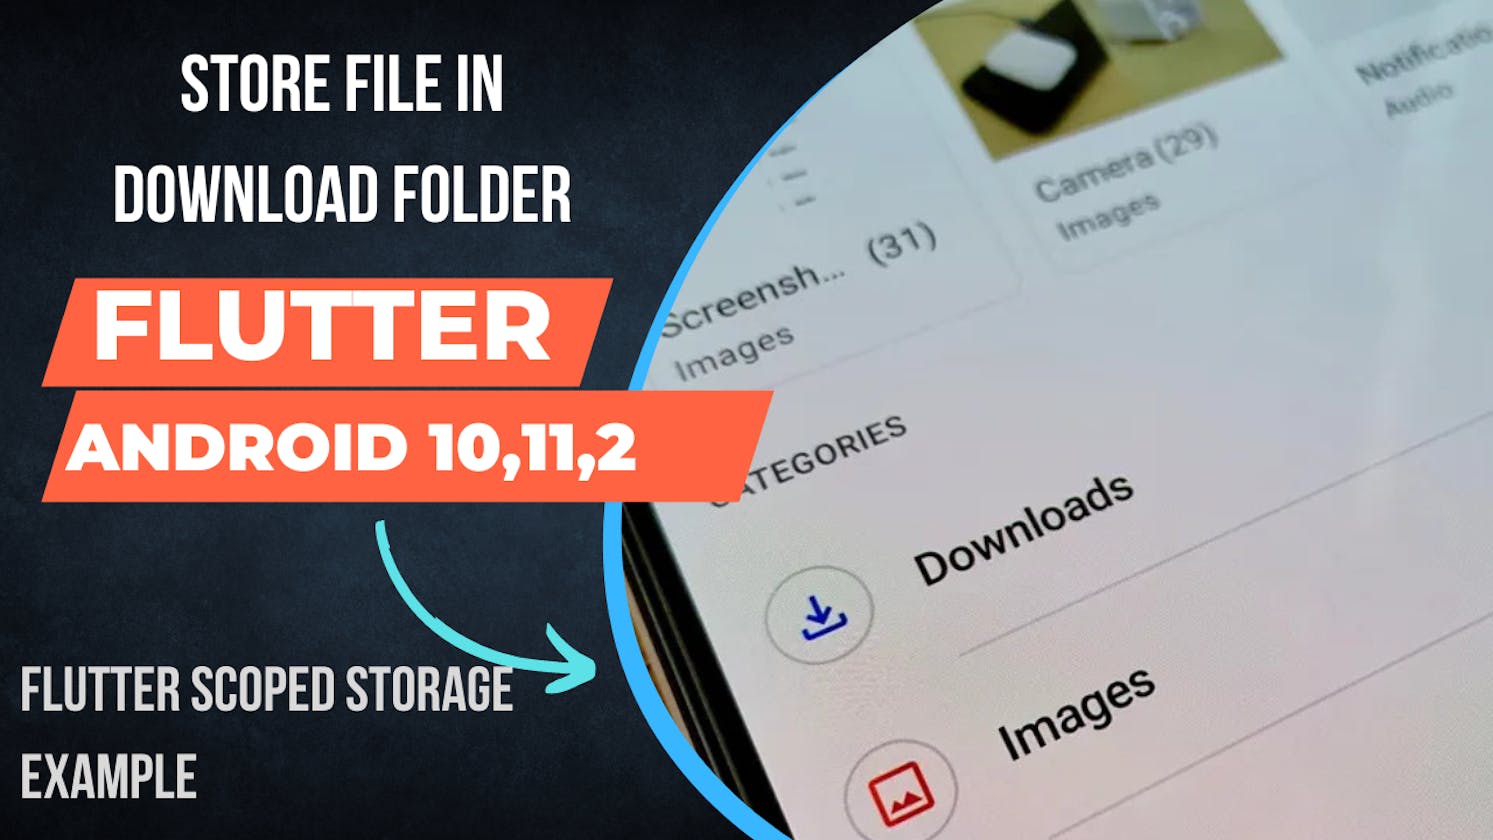 Store file in Download Folder Android 10, 11, 12+ in Flutter.